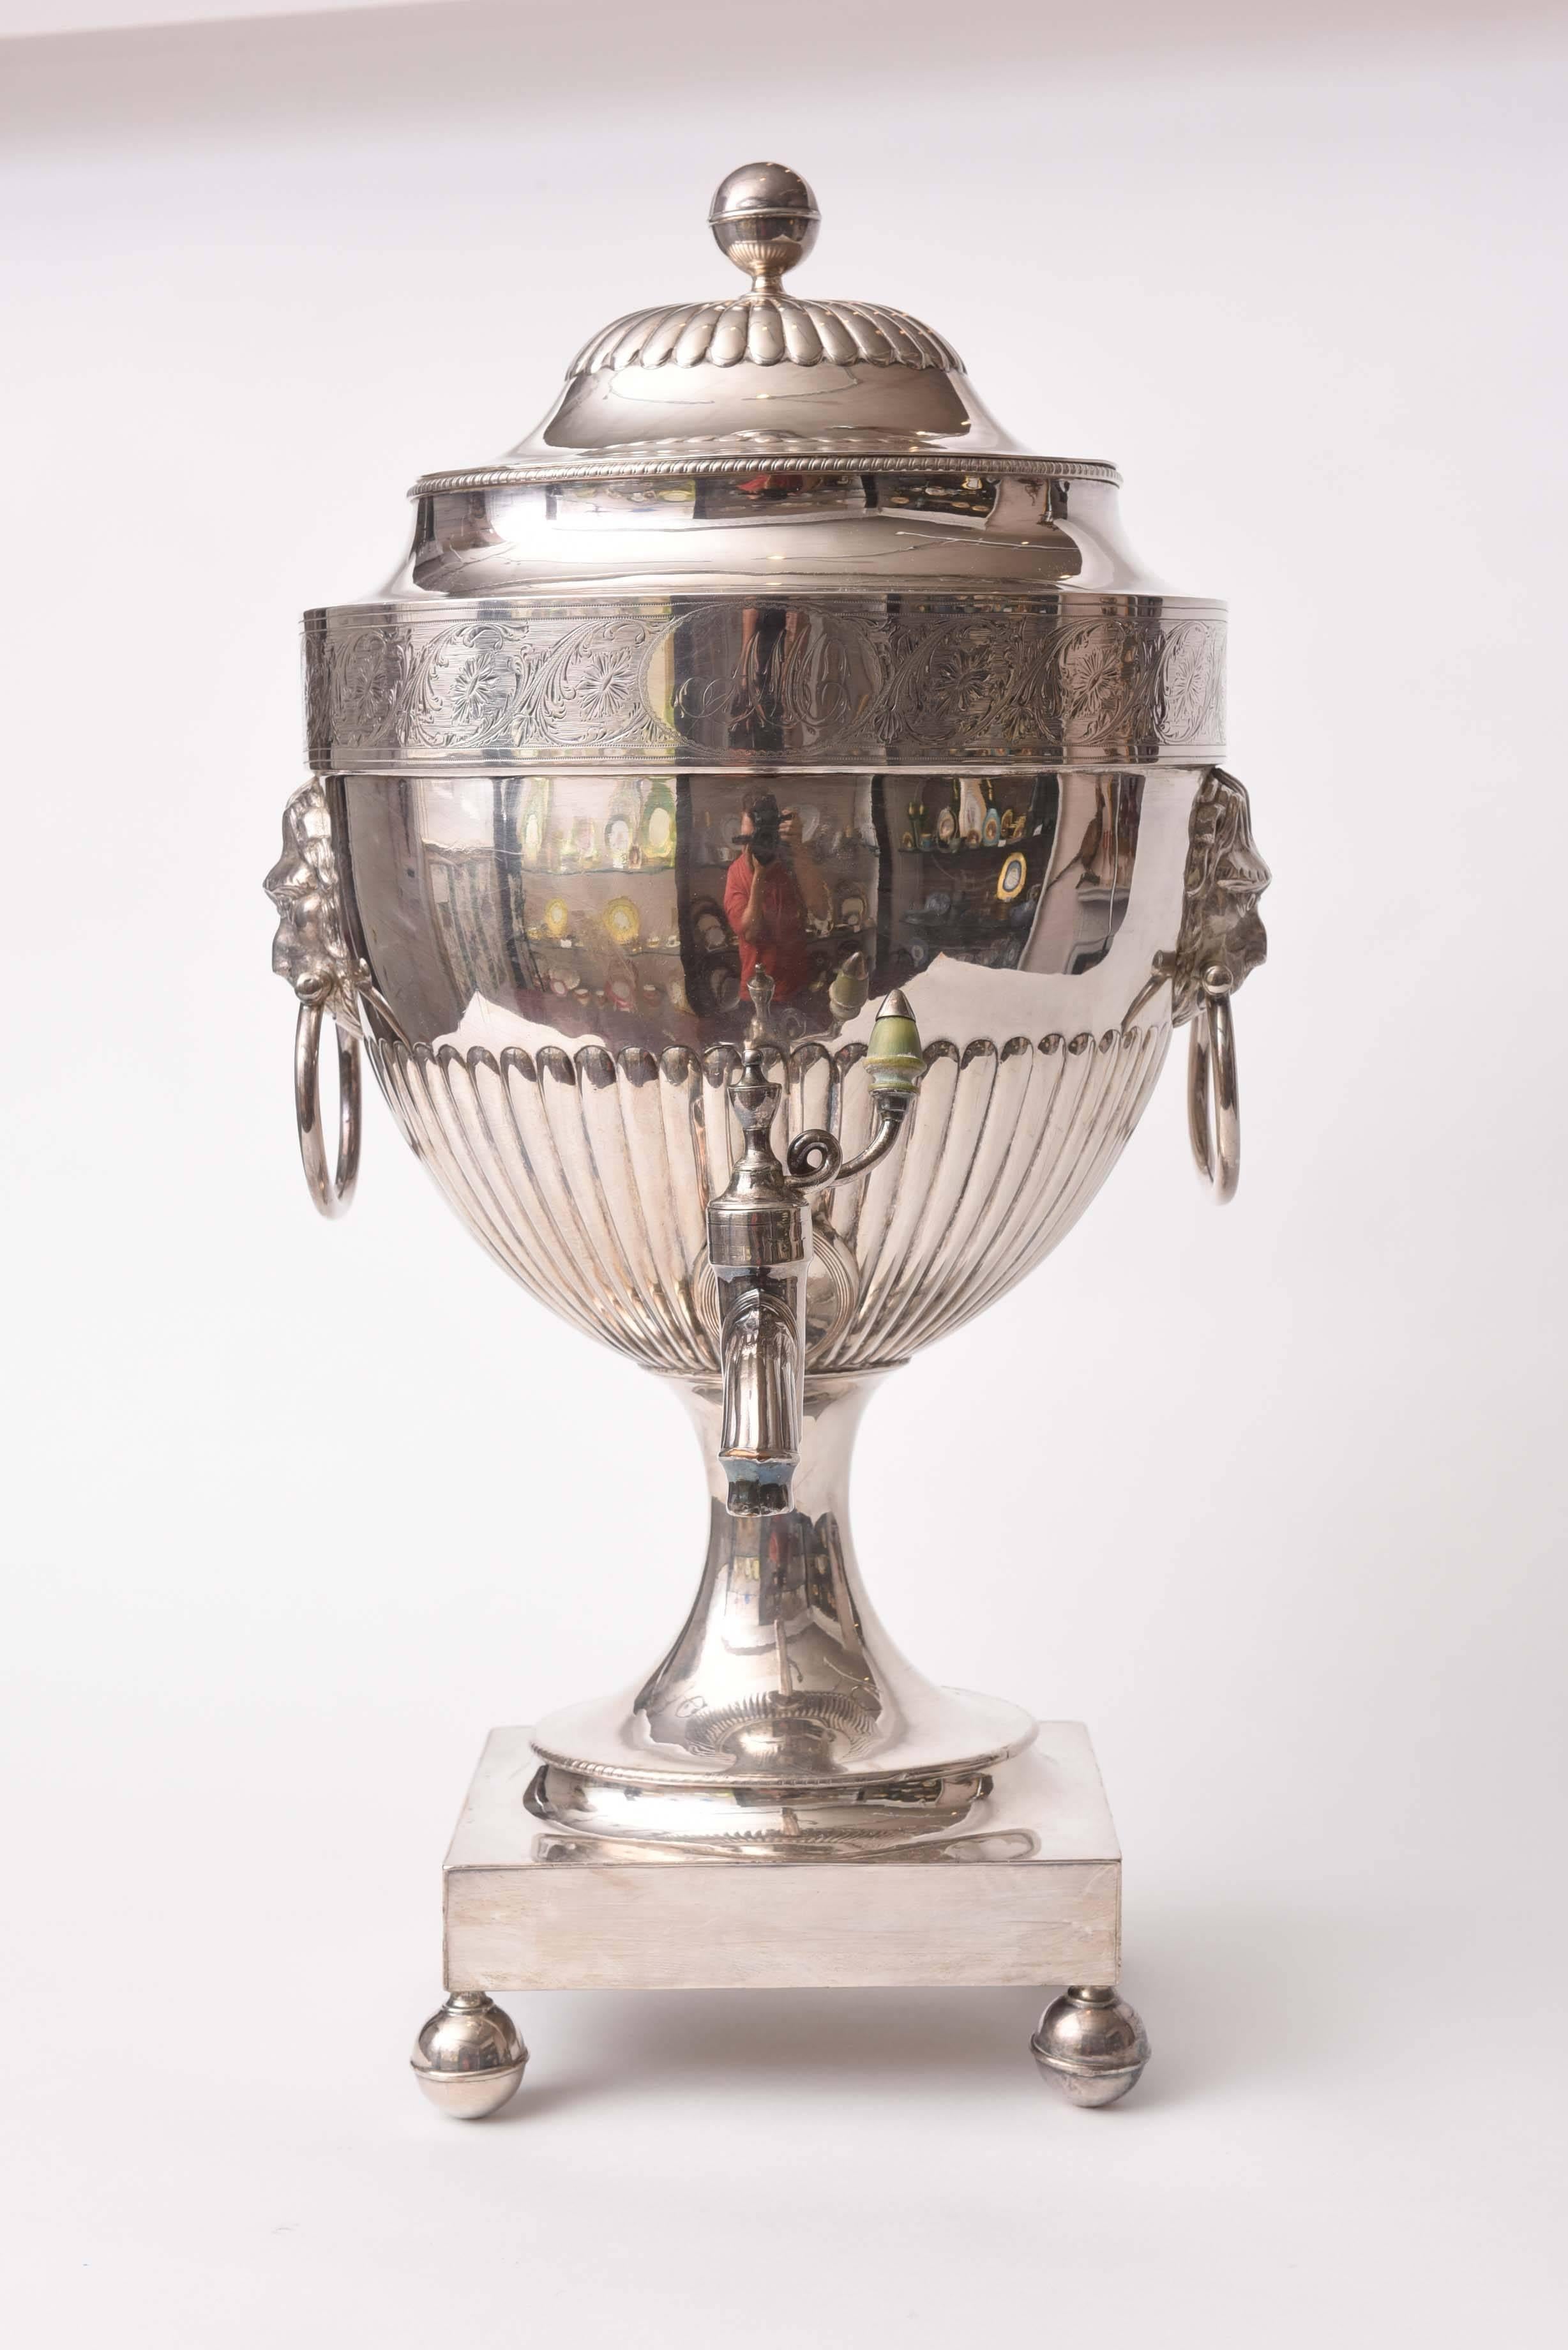 An impressive and highly decorative silver plated hot water, tea or coffee urn. We attribute to one of the Sheffield England manufacturers and note the Classic lion's head handles, ball feet, urn shape and finial for this attribution. There is only